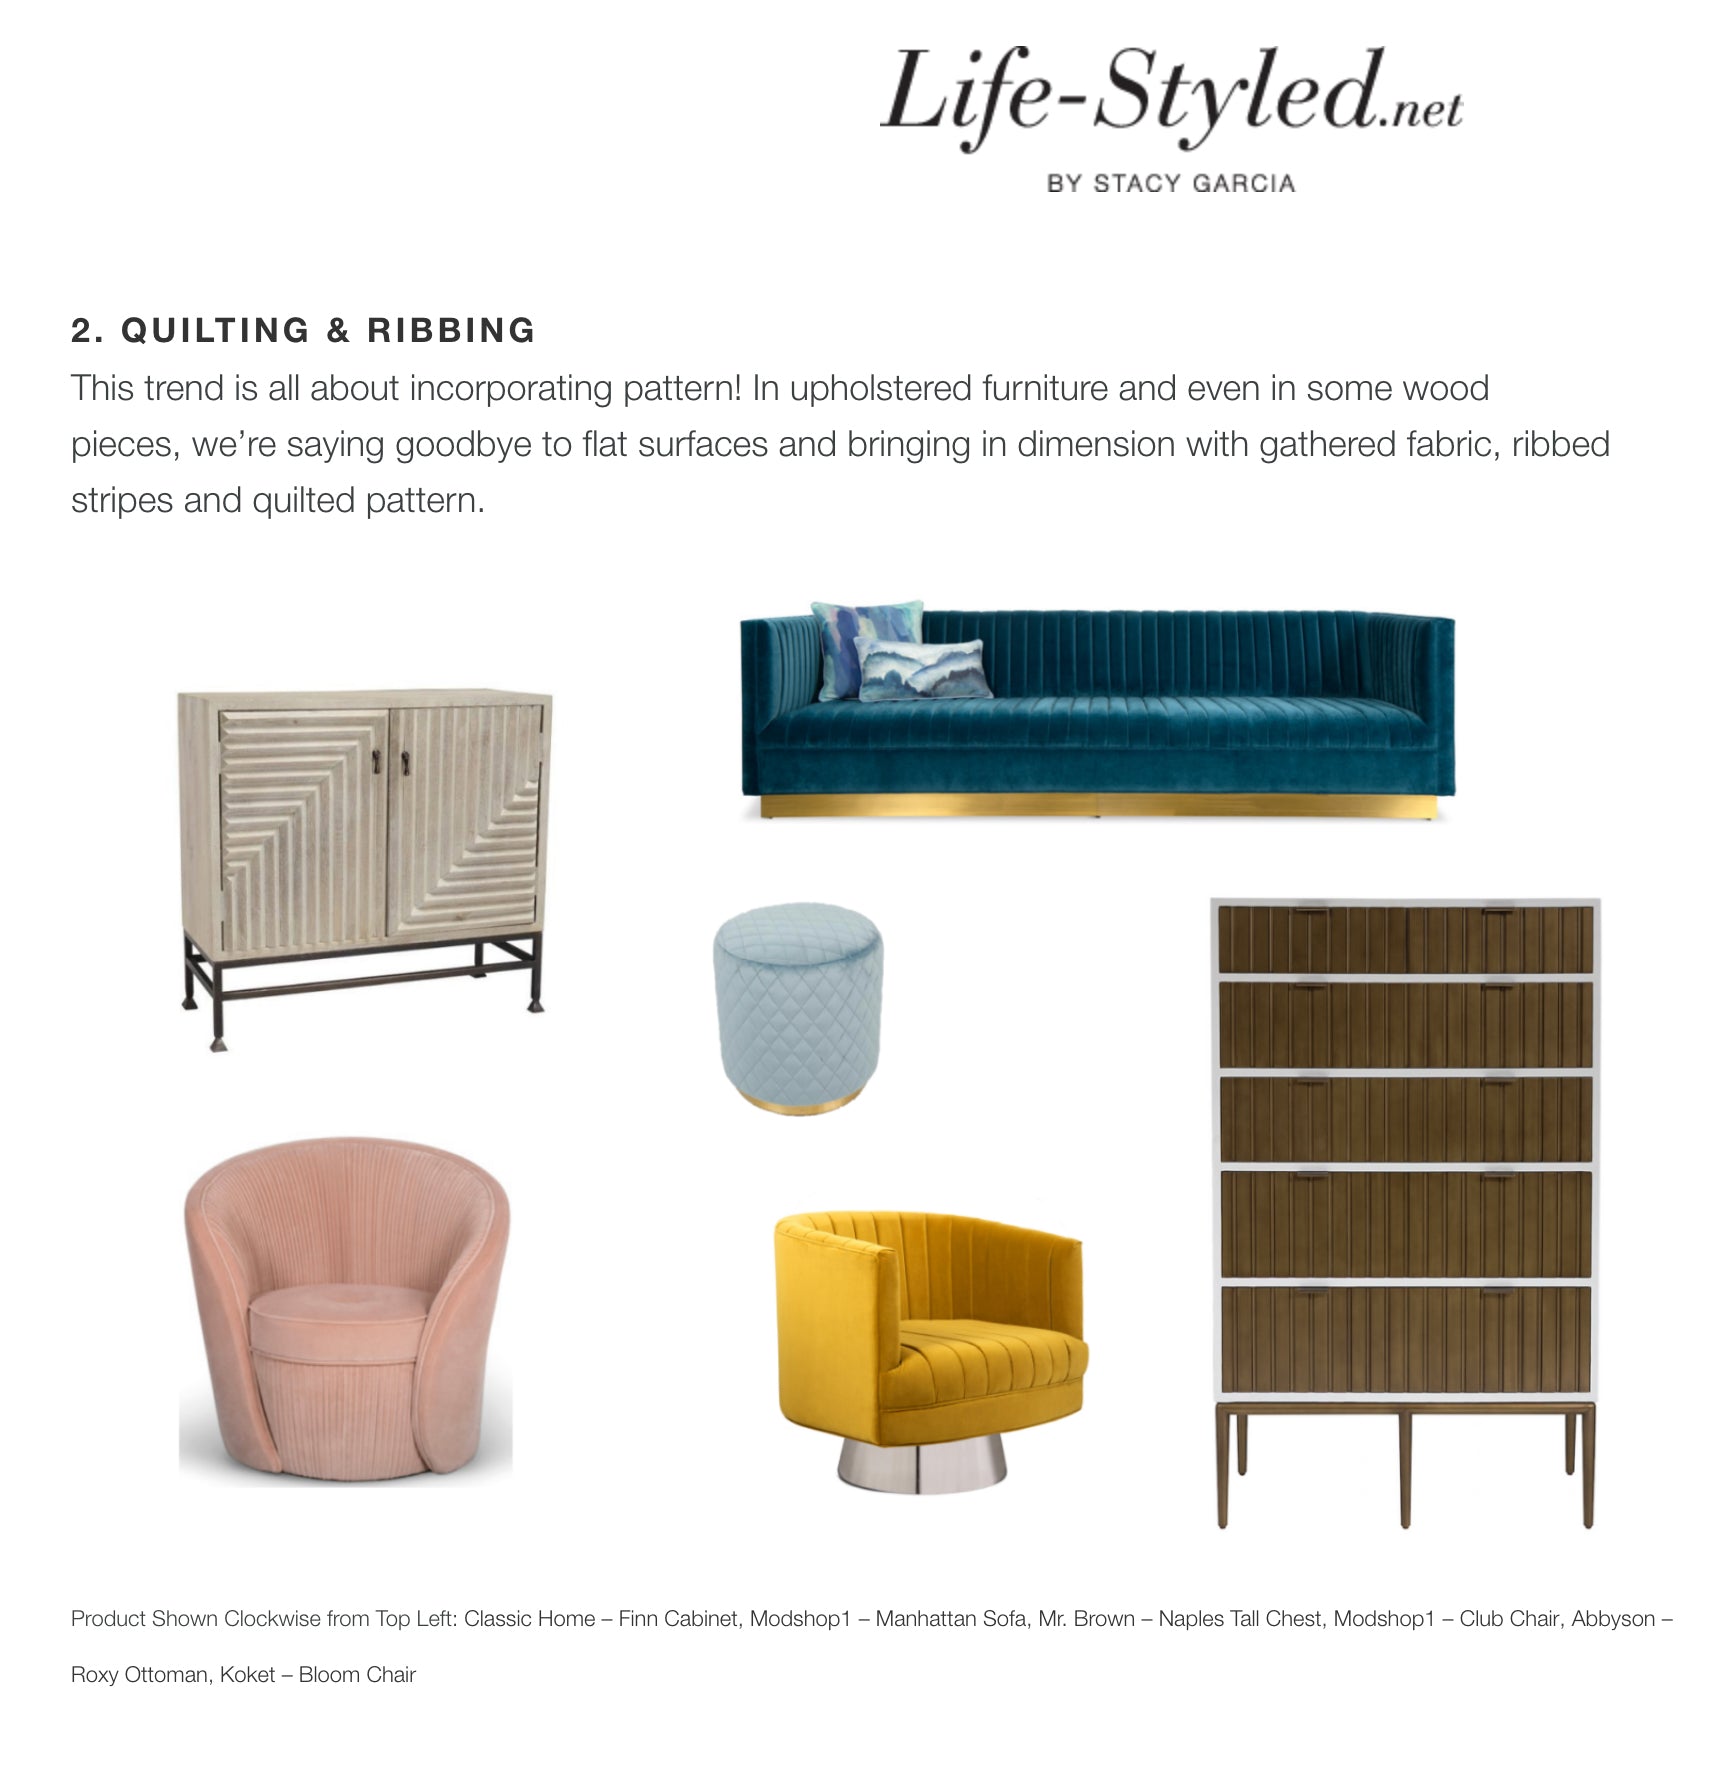 high point market style report article life-styled.net by stacy garcia featuring modshop's manhattan sofa in como cyan velvet